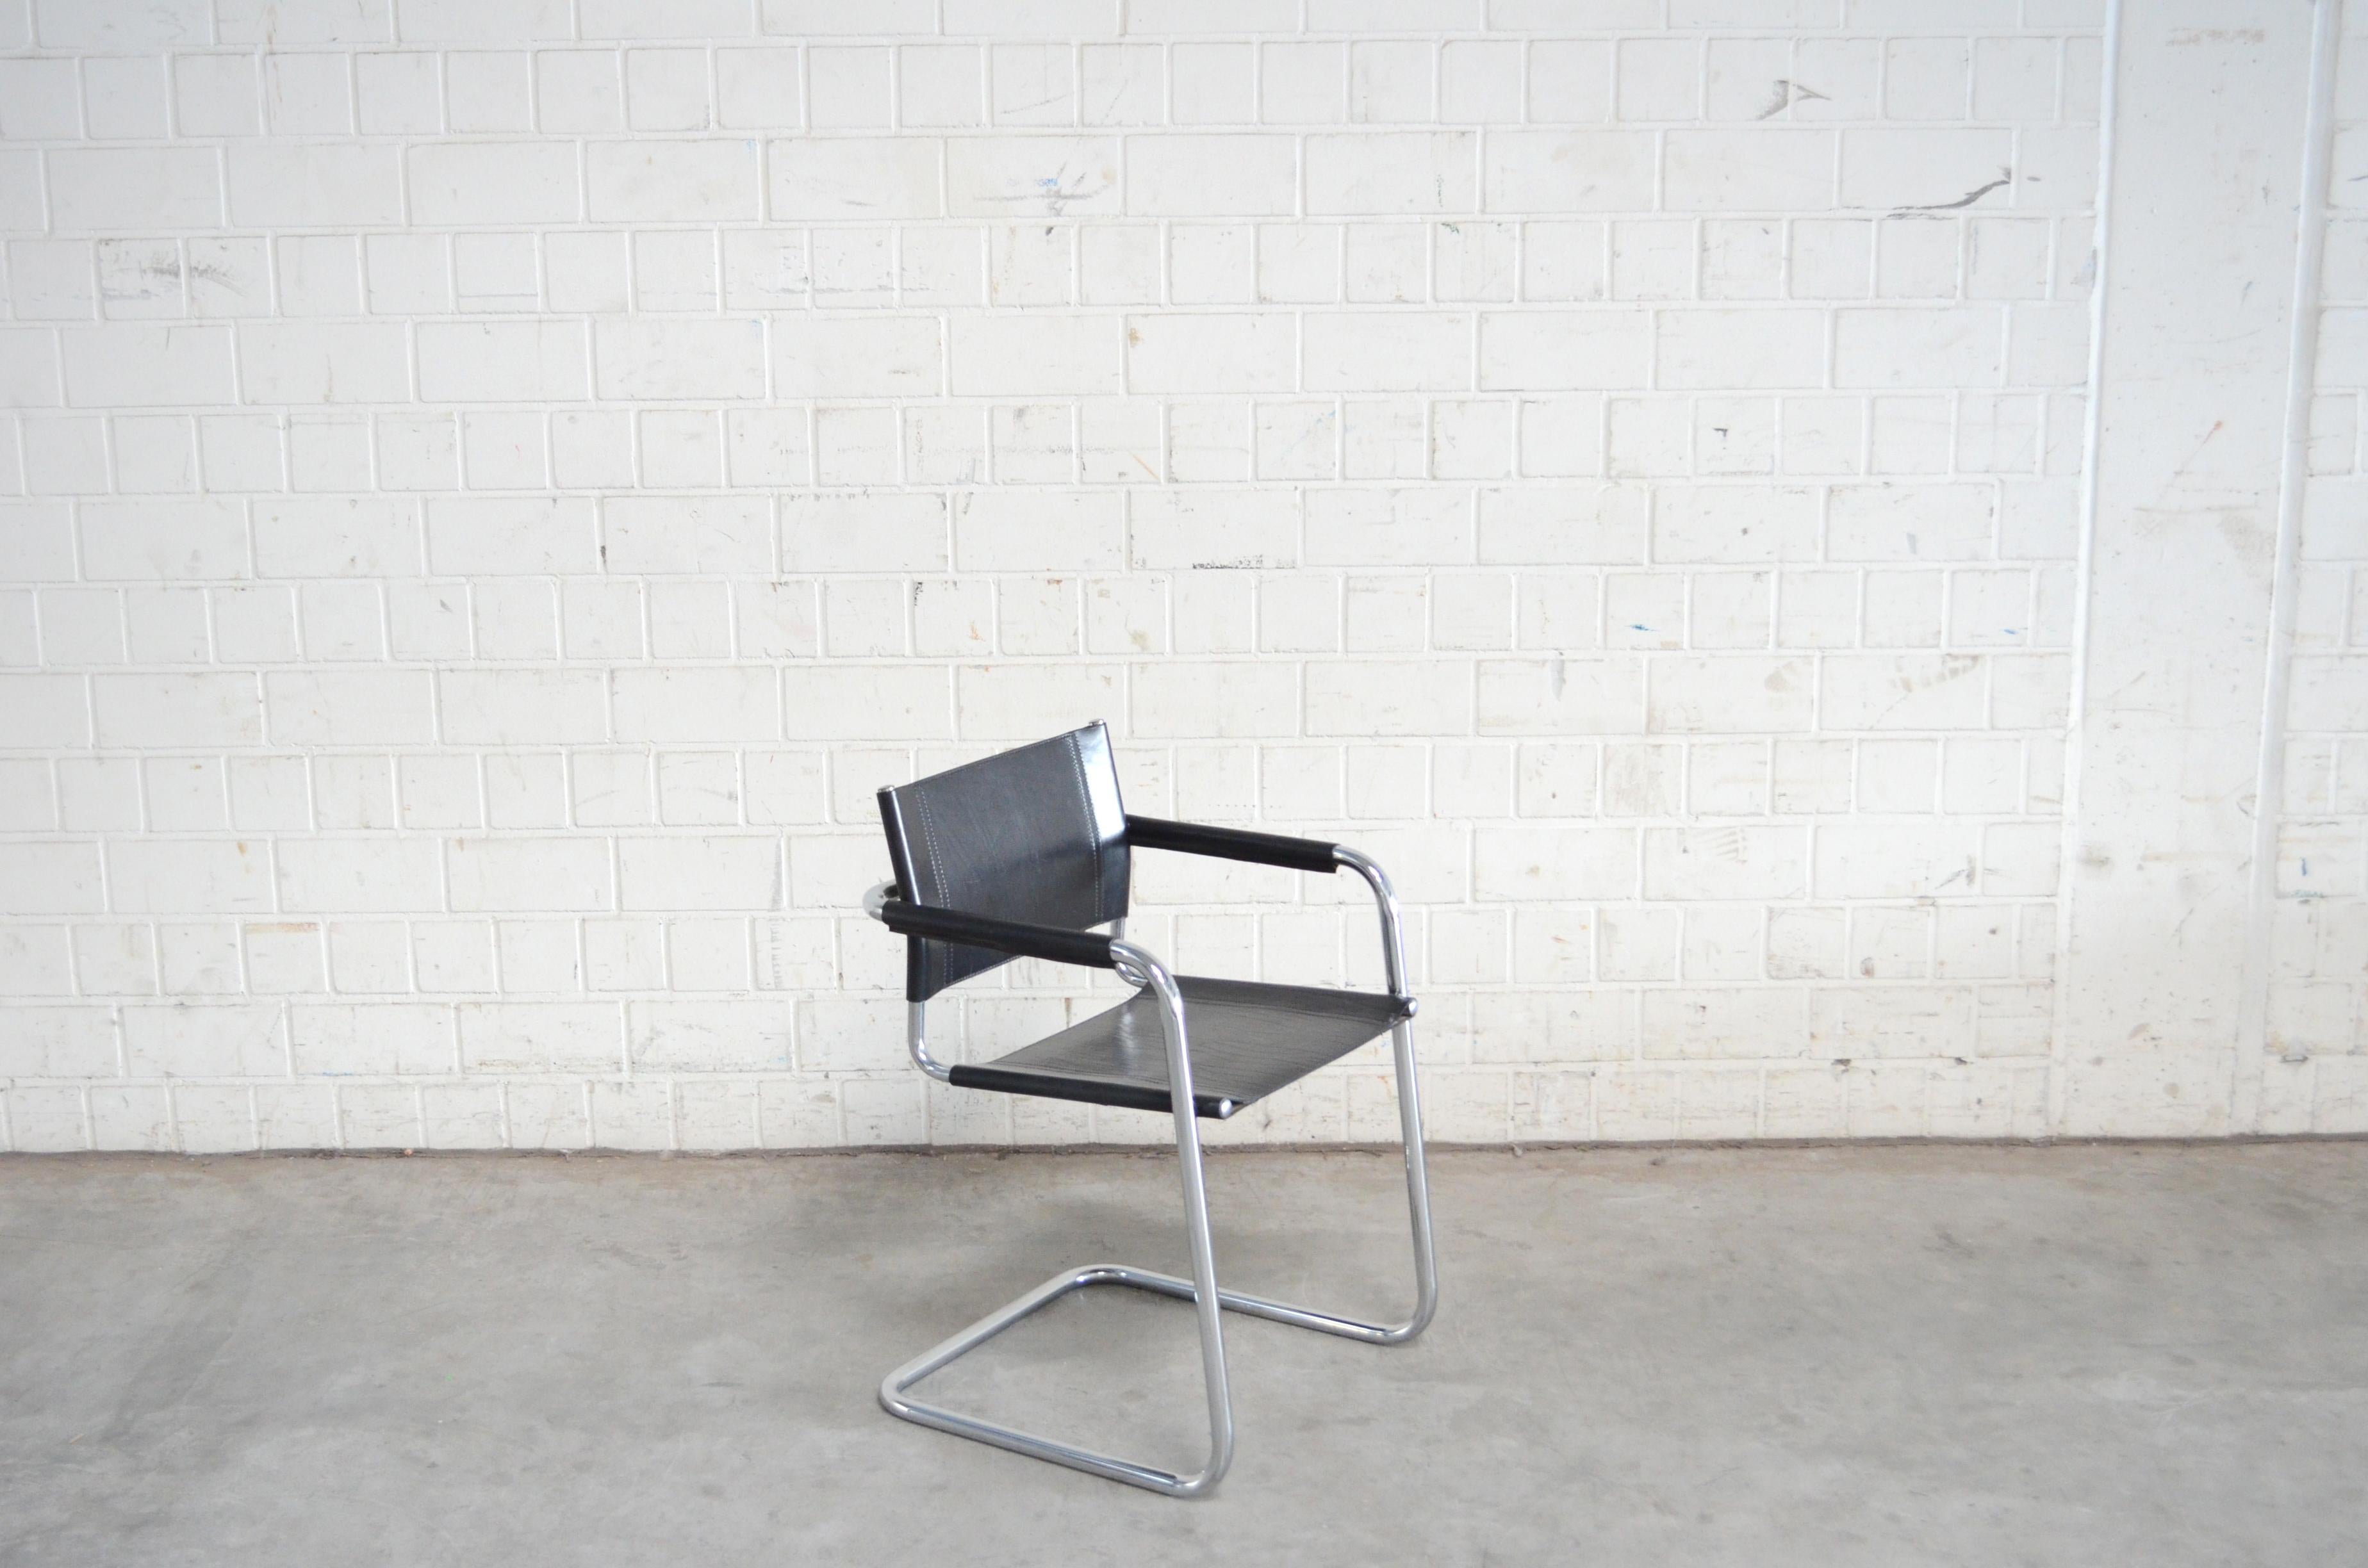 Cantilever chair by Italian manufacture Linea Veam.
Tubular chrome steel frame and black saddle leather.
This version is the dynamic type of cantilever chair with a little bend more on the front tubular.
For comparison see the last picture with a